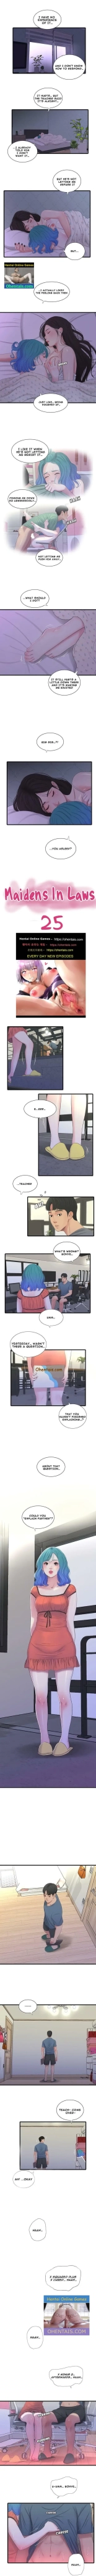 One's In-Laws Virgins Ch. 23-25 : page 12